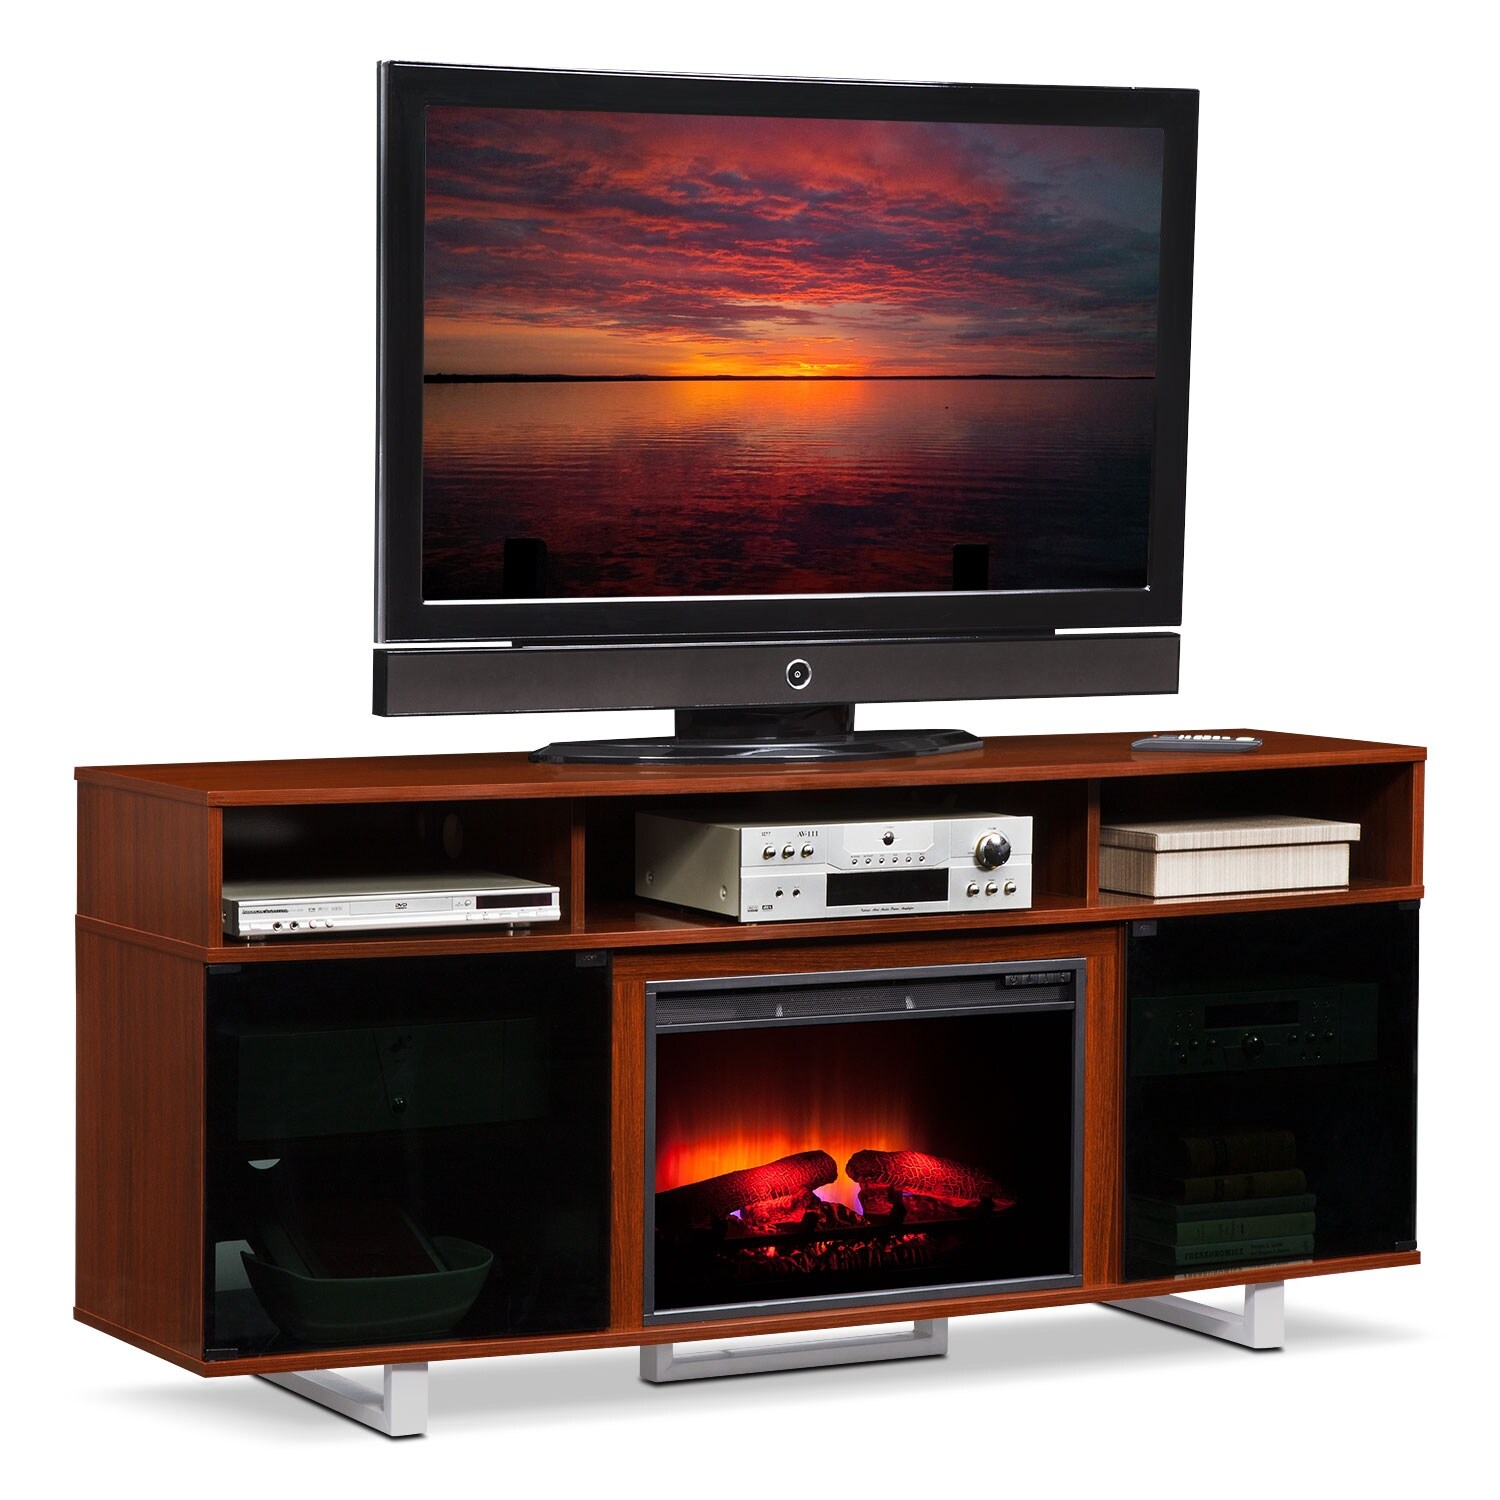 Pacer 72" Traditional Fireplace TV Stand - Cherry | Value ...